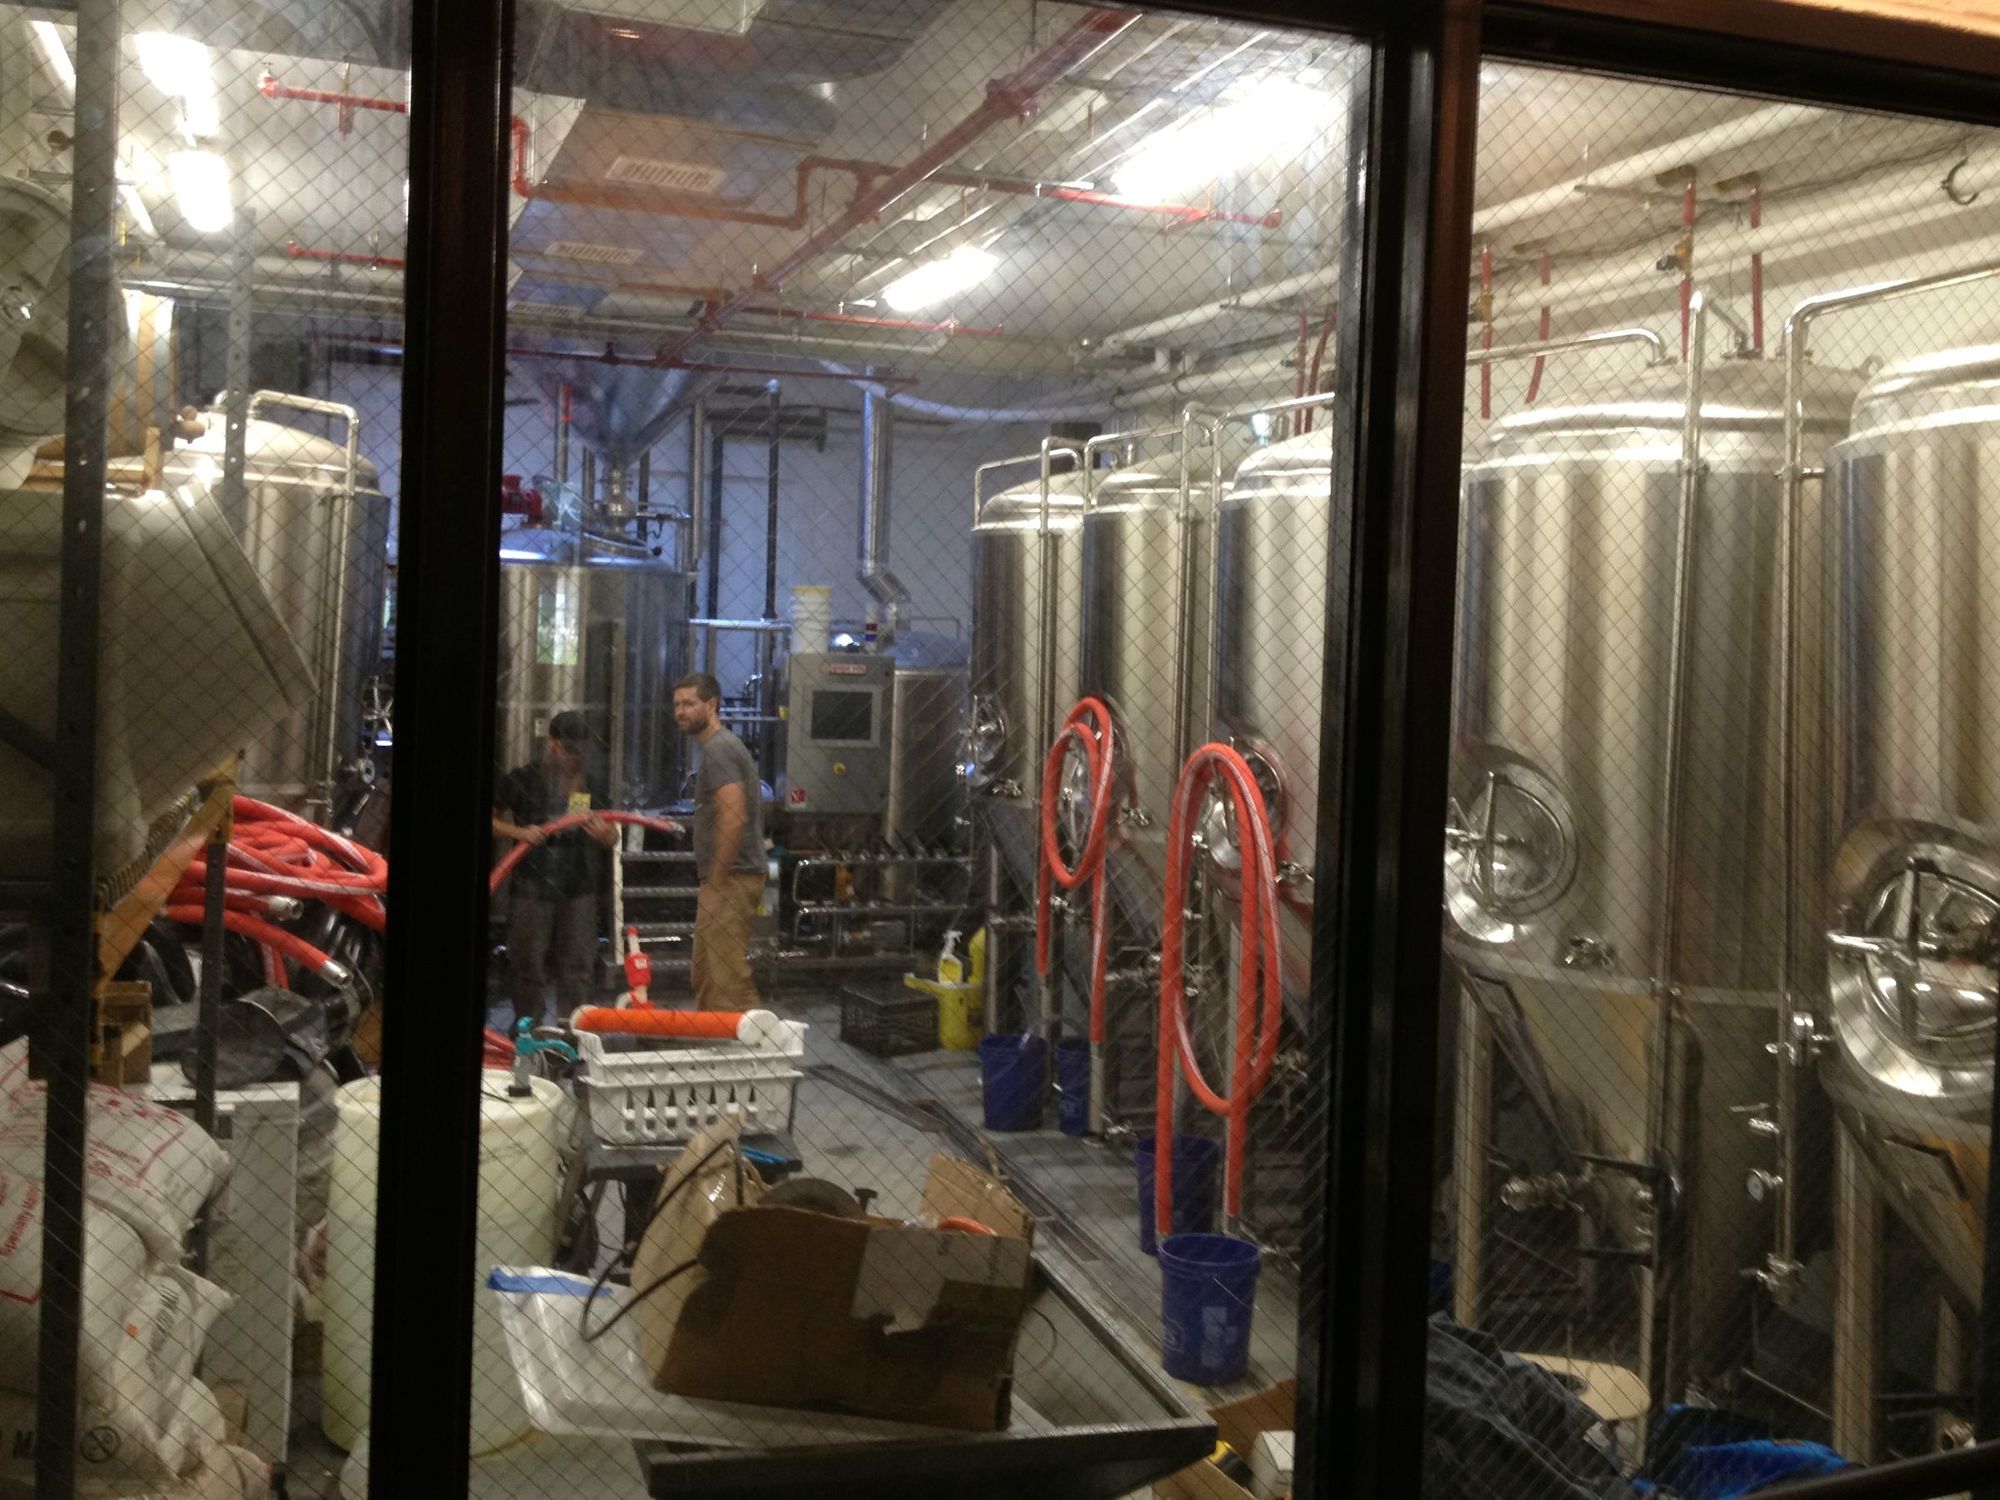 Sycamore’s Justin Israelson Opening New Brewpub In Gowanus